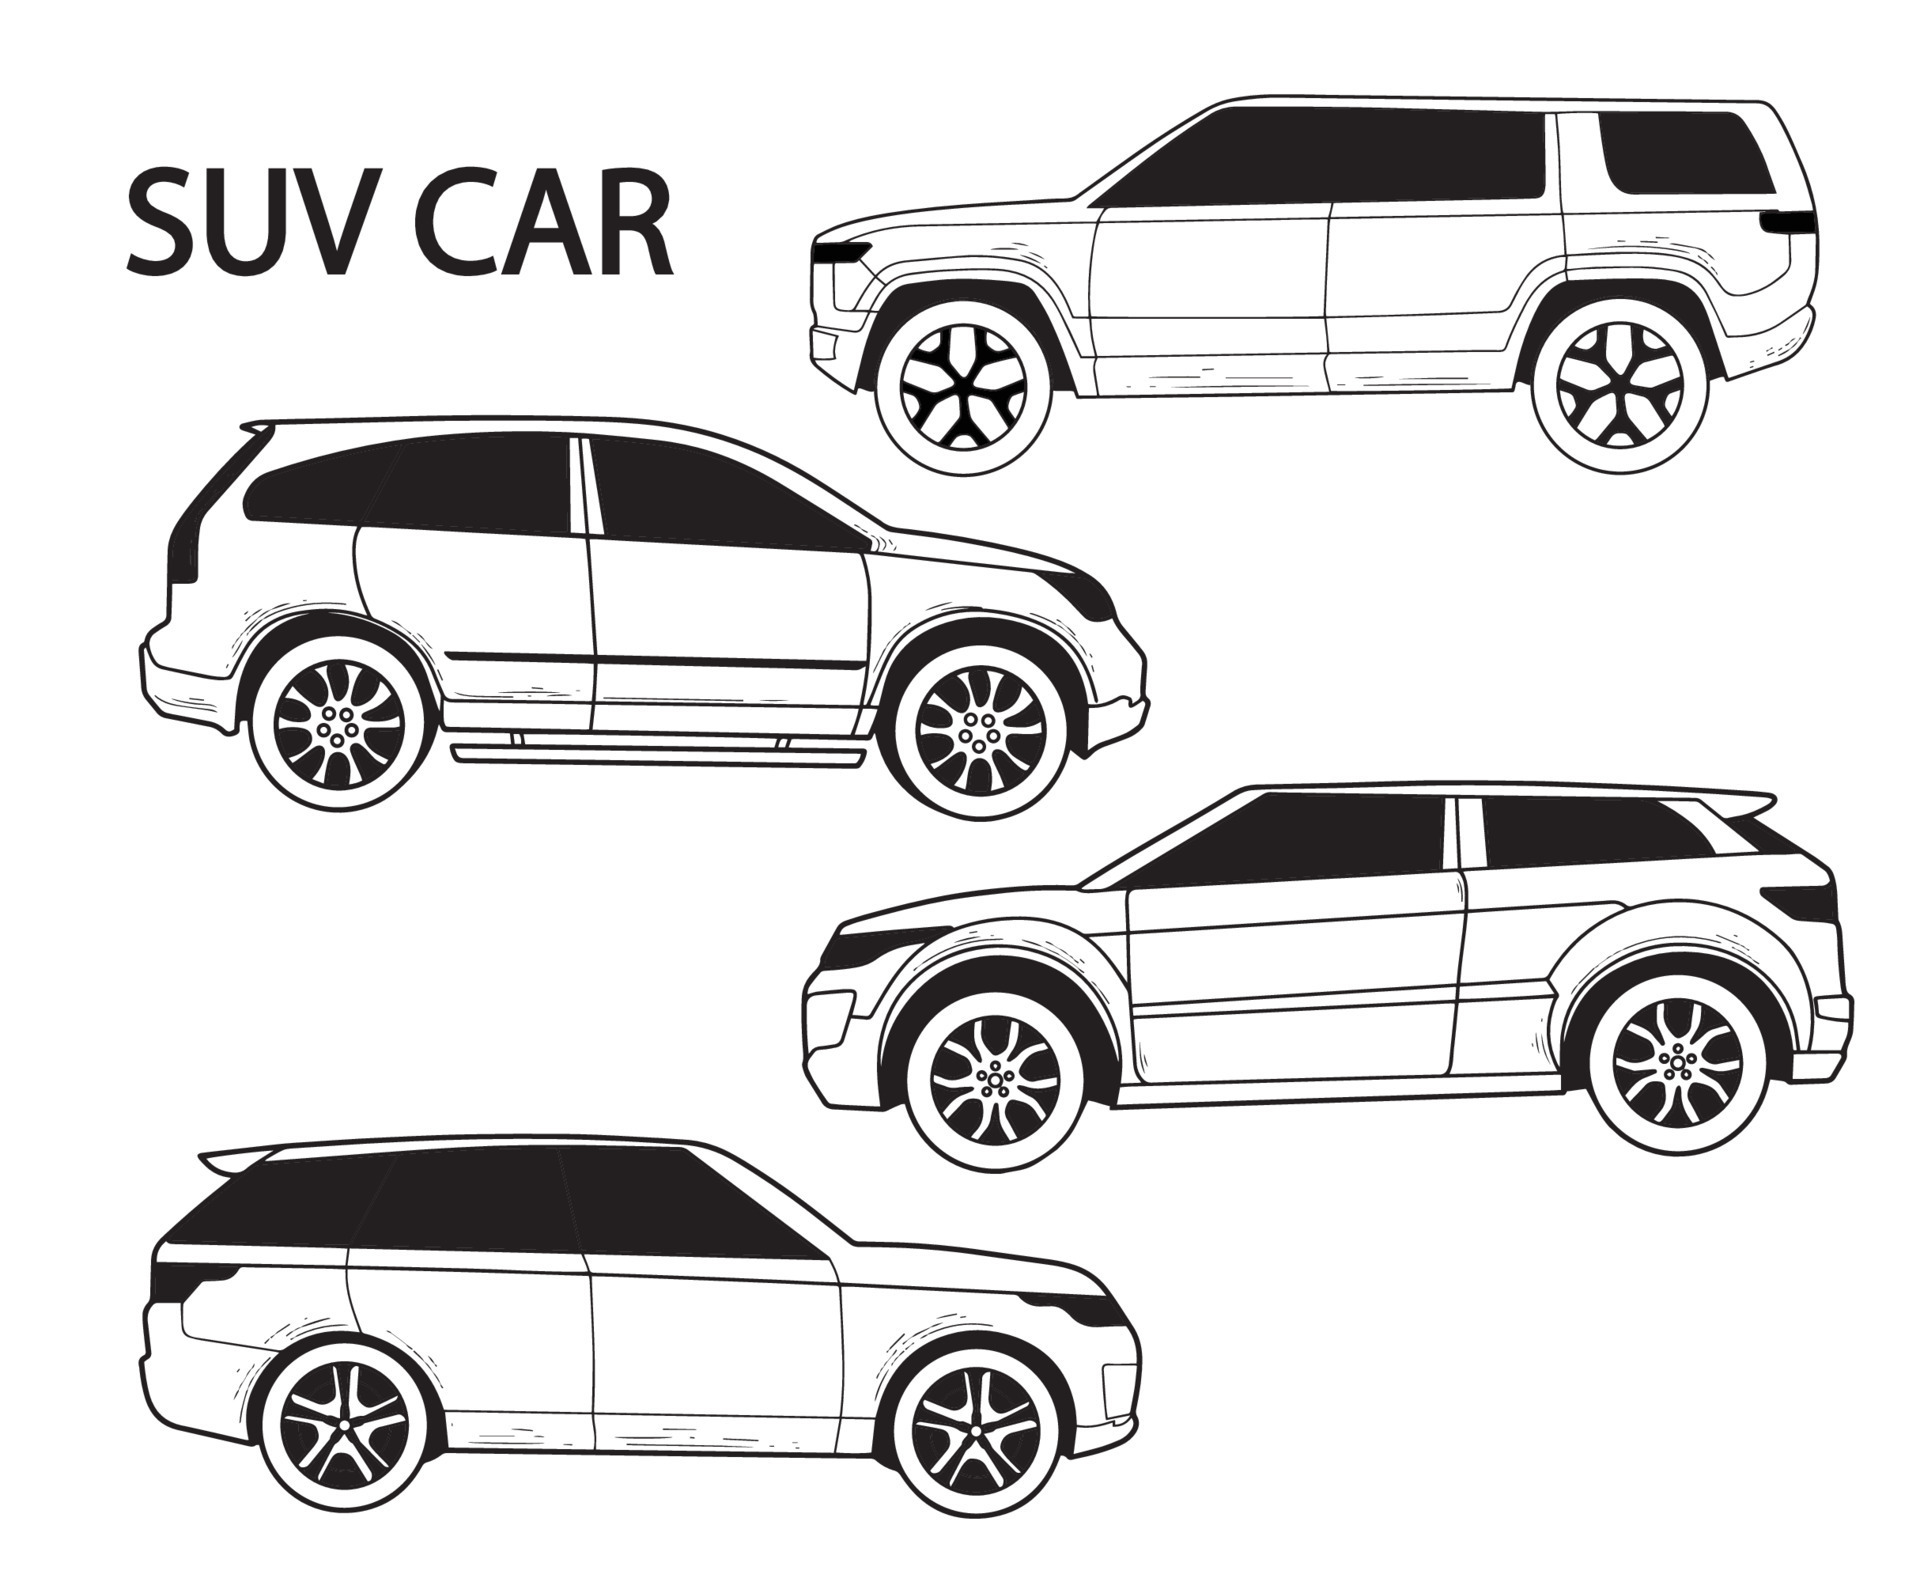 How to Draw a SUV Gloster car step by step - [10 Easy Phase]